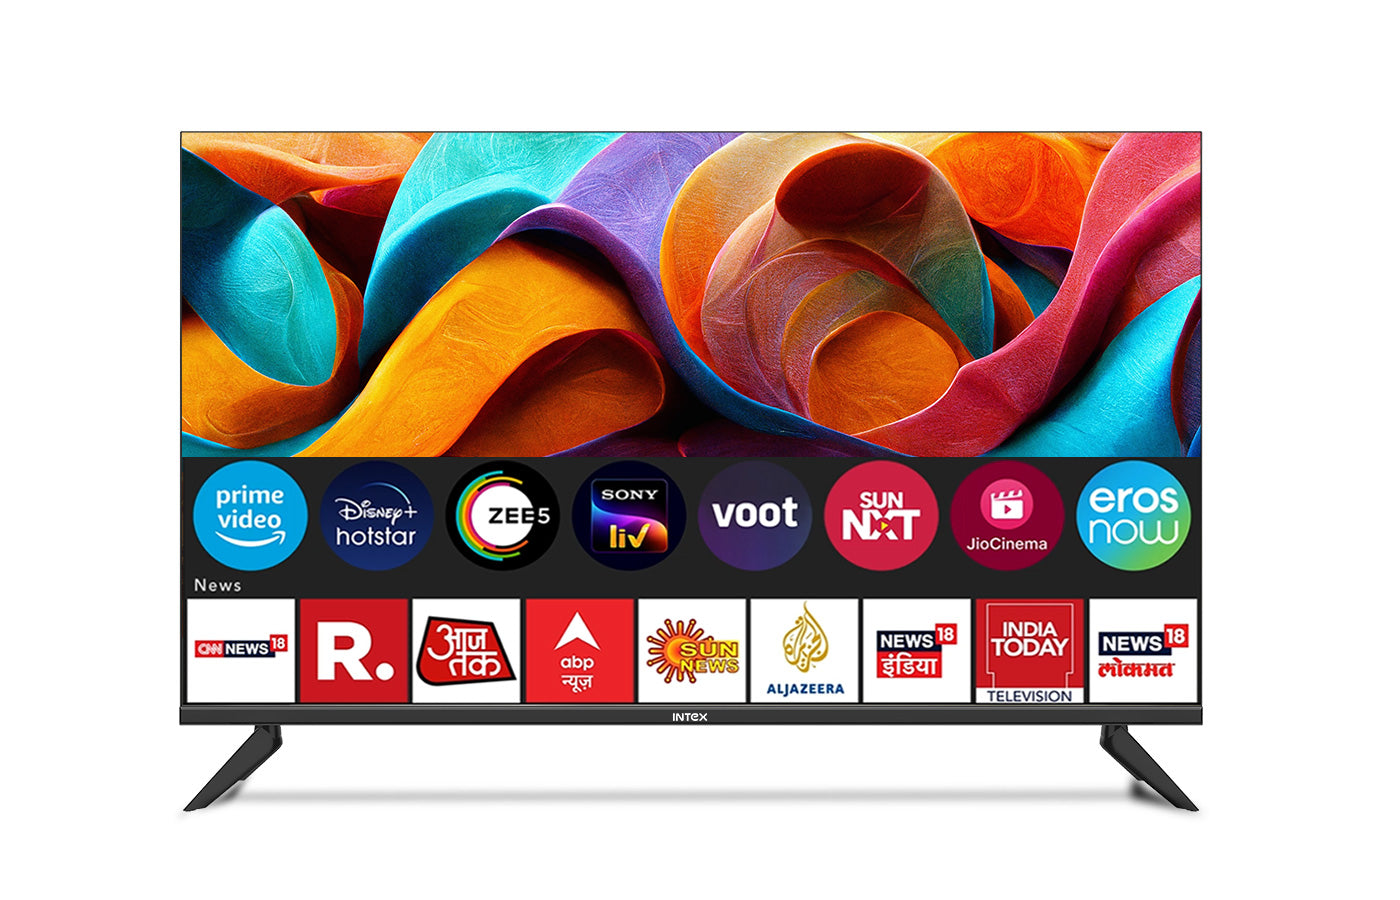 led smart TV 19.5 21.5 inch full hd tv 1080p with android smart led TV  television